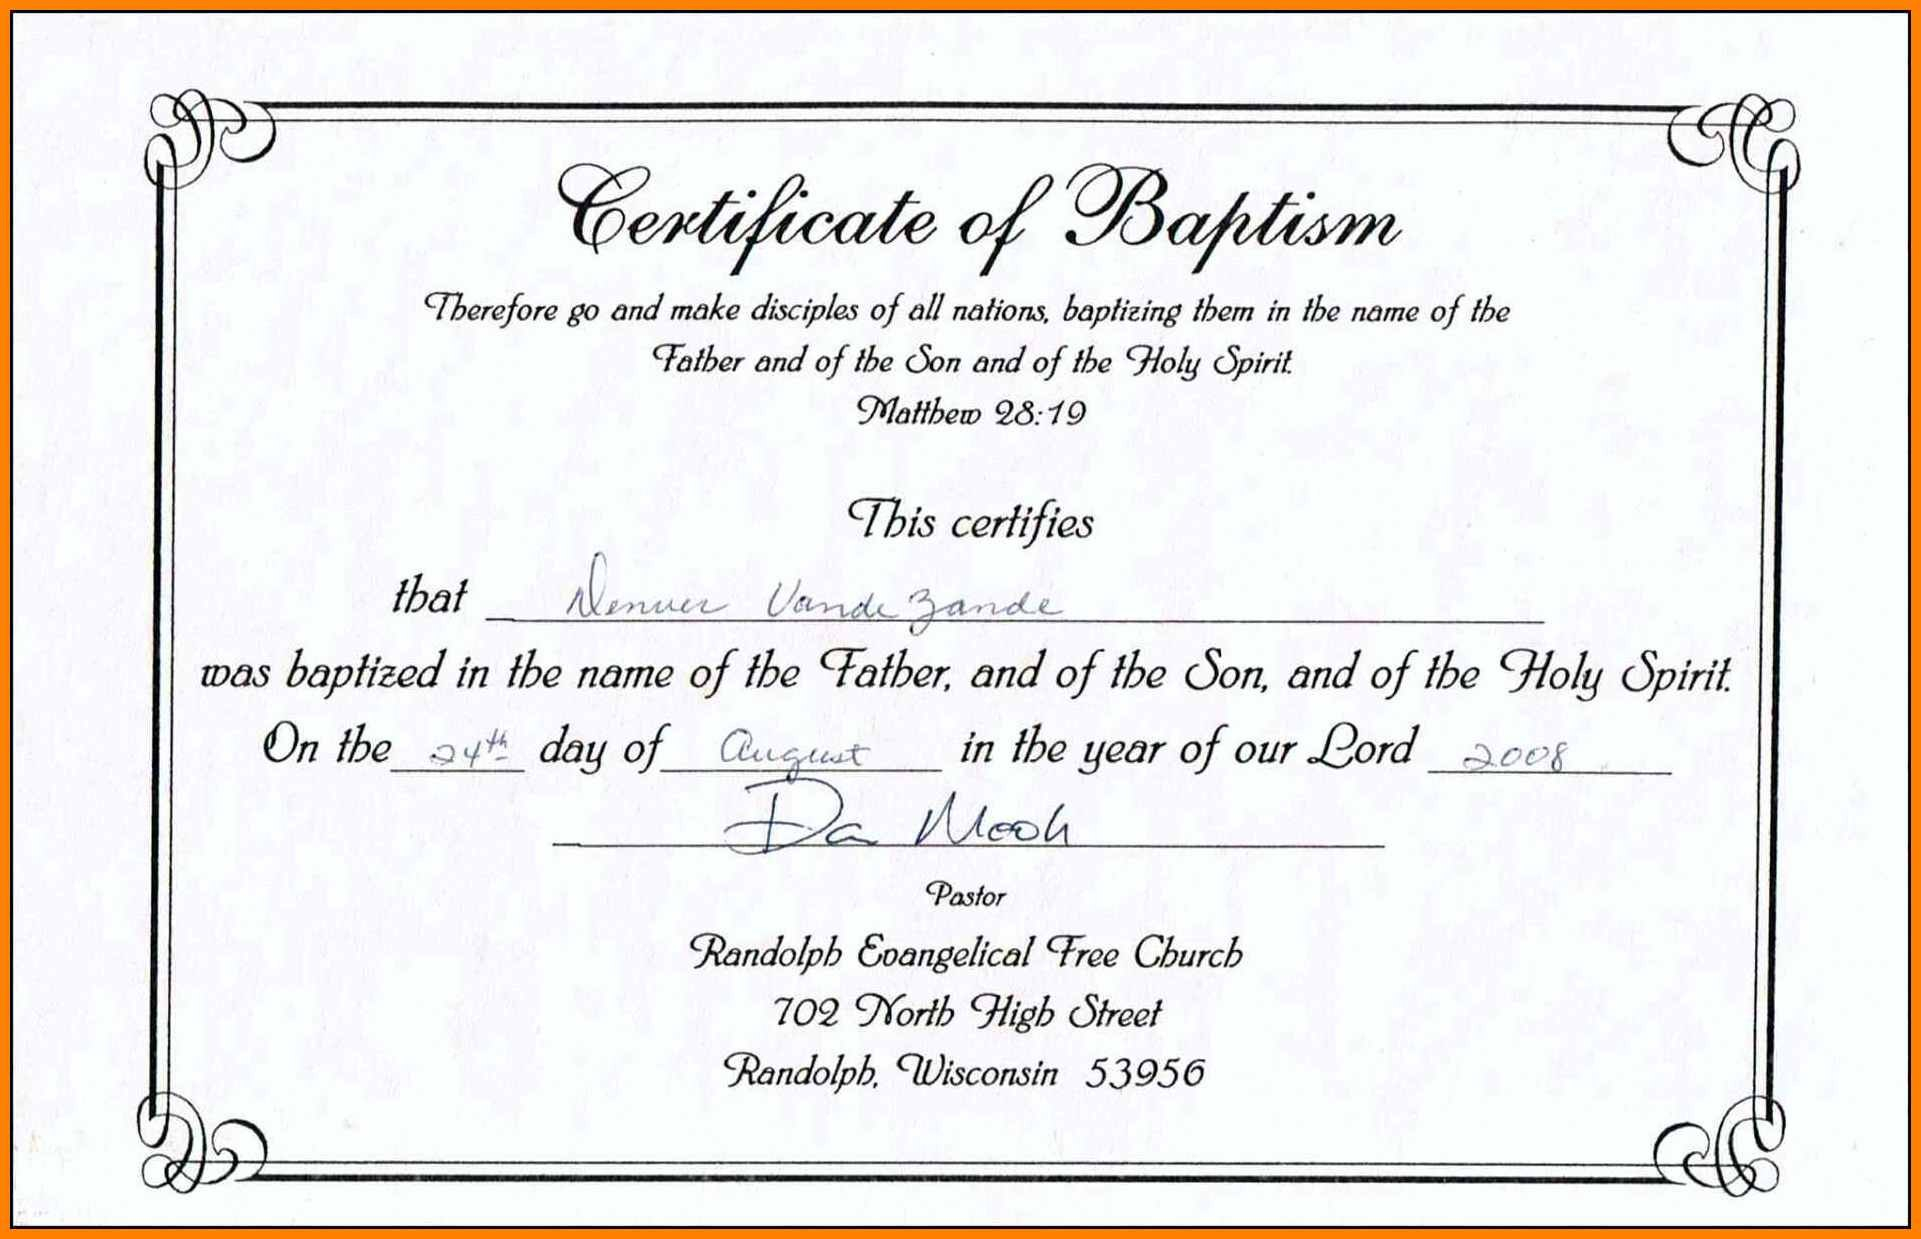 Baptism Certificate Template Publisher Download Christening In intended for Baptism Certificate Template Download